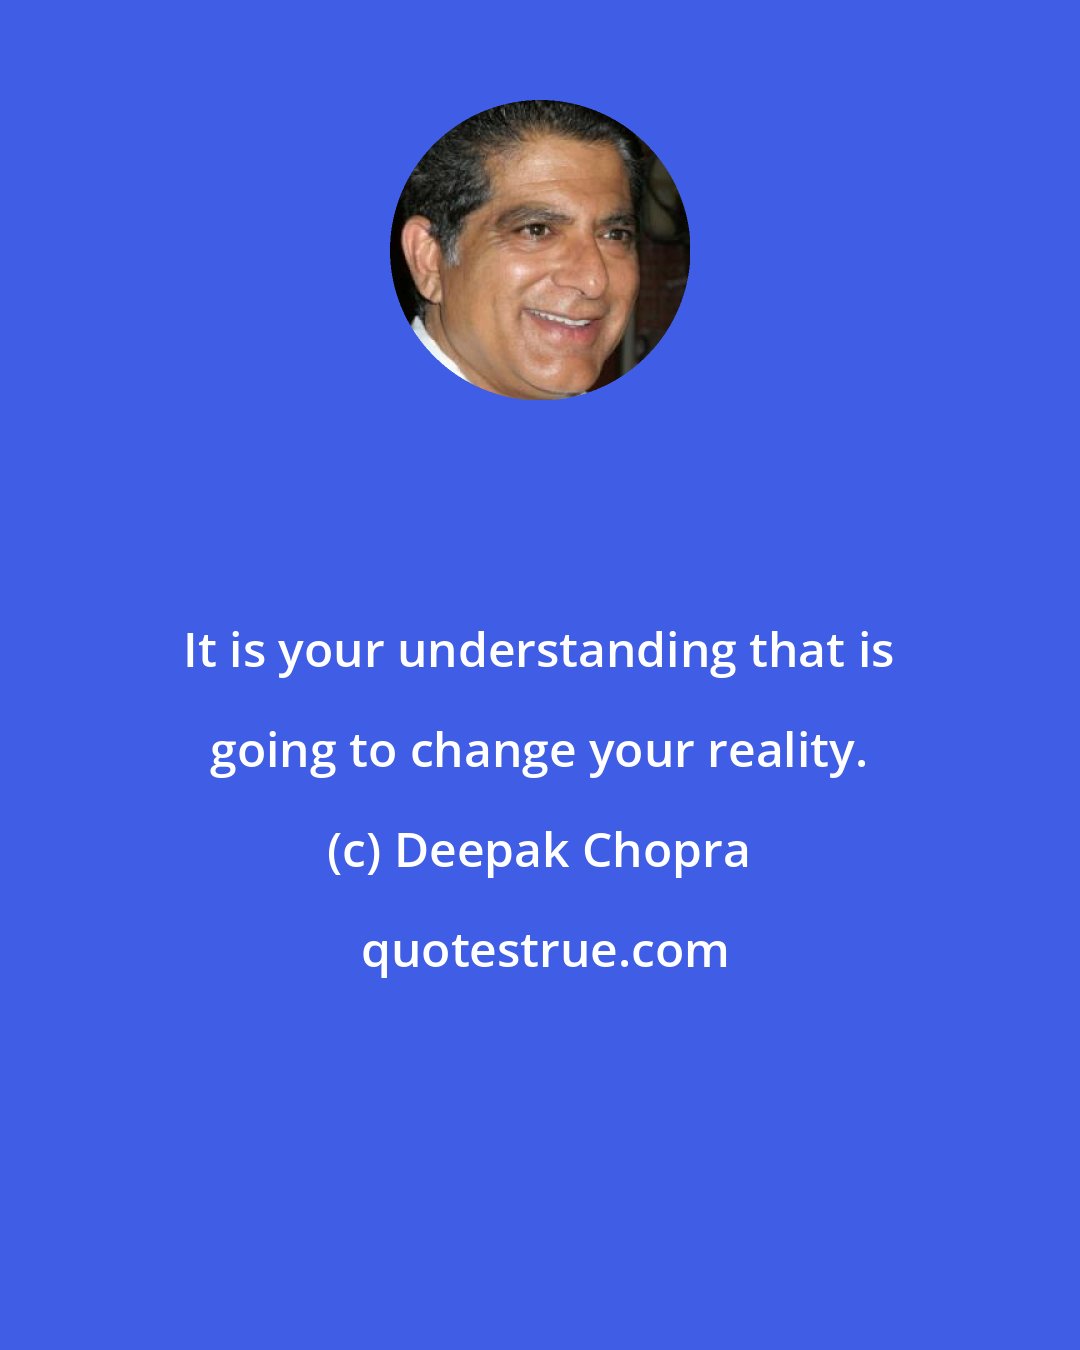 Deepak Chopra: It is your understanding that is going to change your reality.